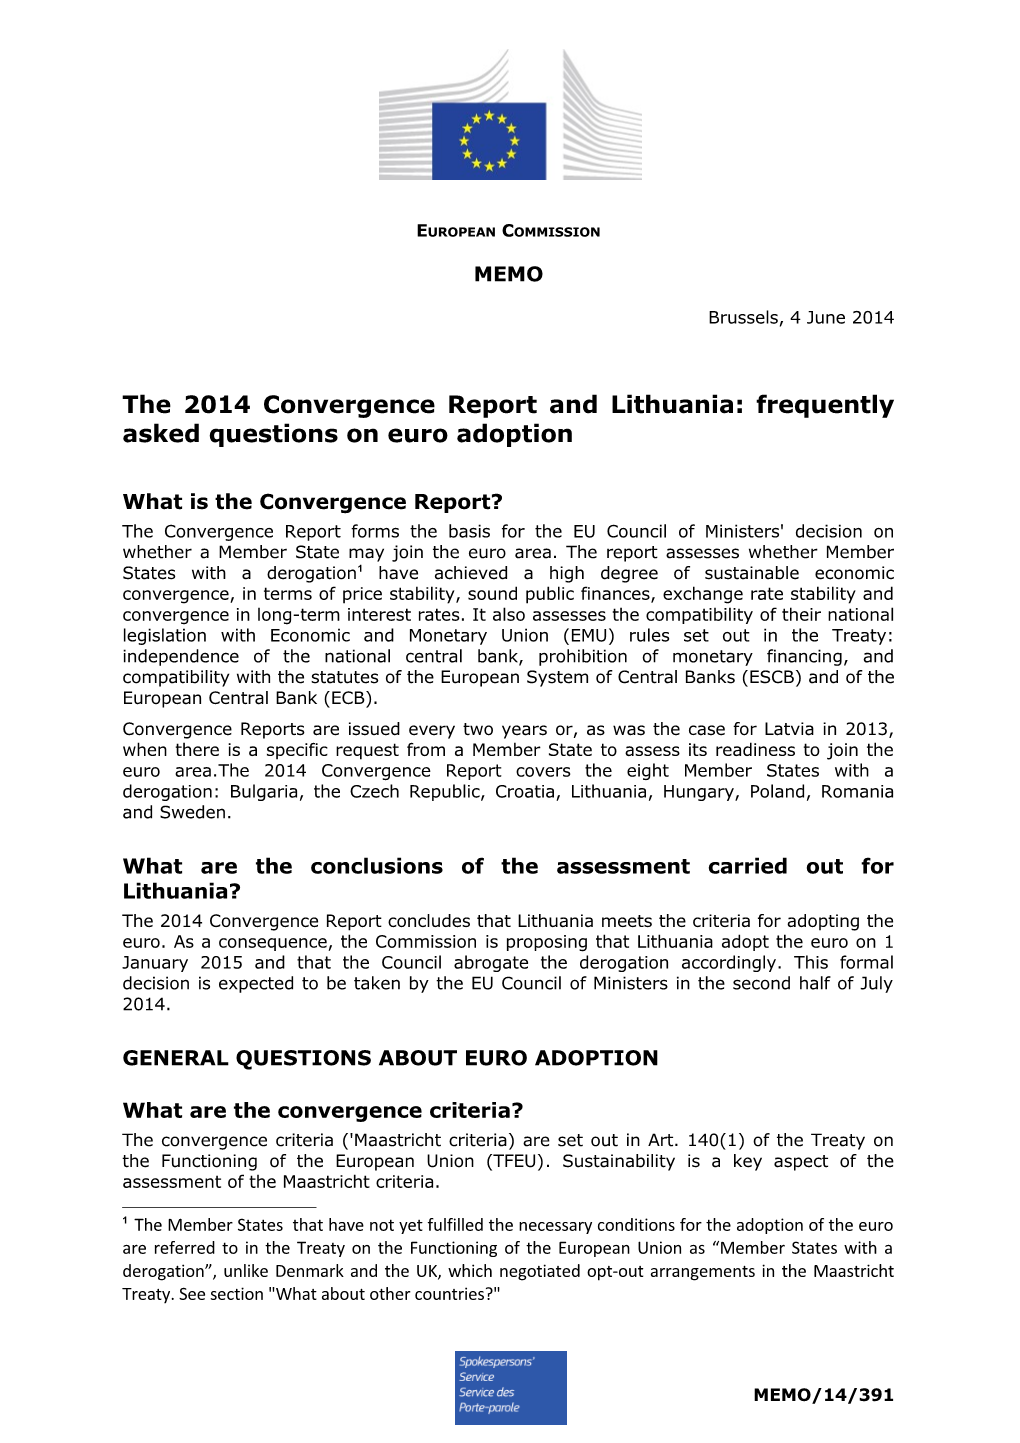 The 2014 Convergence Reportandlithuania: Frequently Asked Questions on Euro Adoption